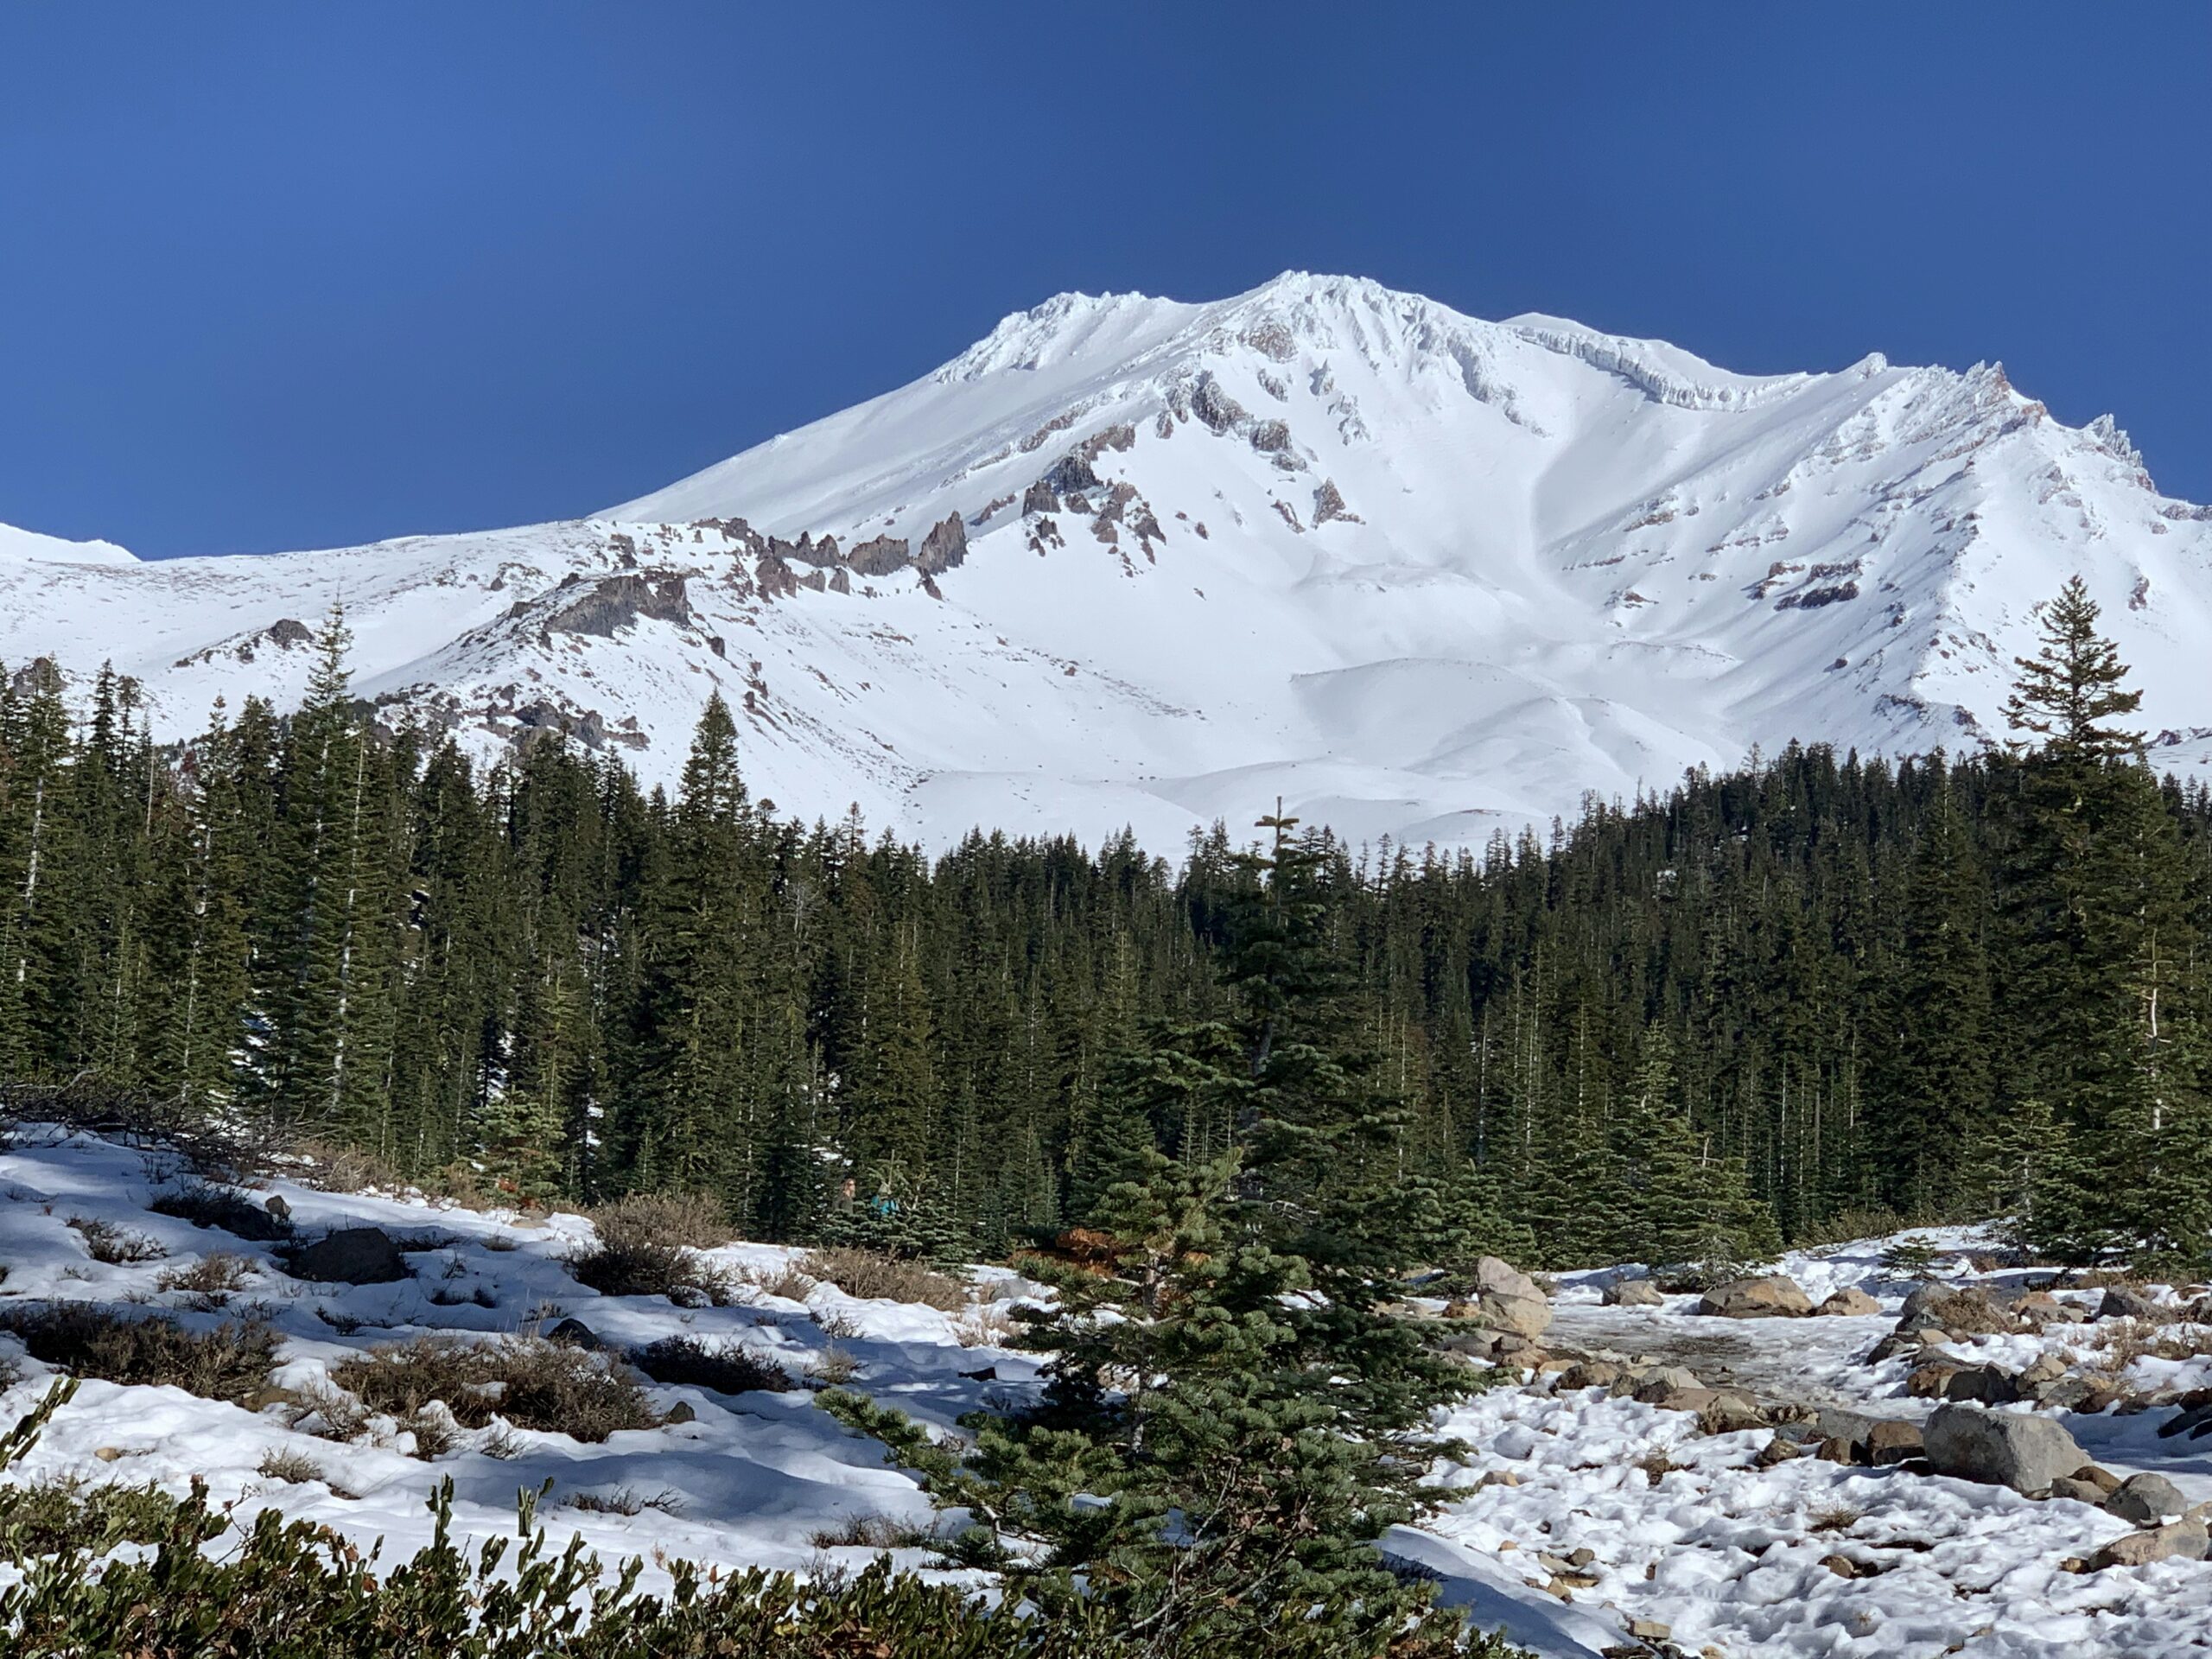 Are There Any Restroom Facilities Along The Hiking Trails Of Mount Shasta?